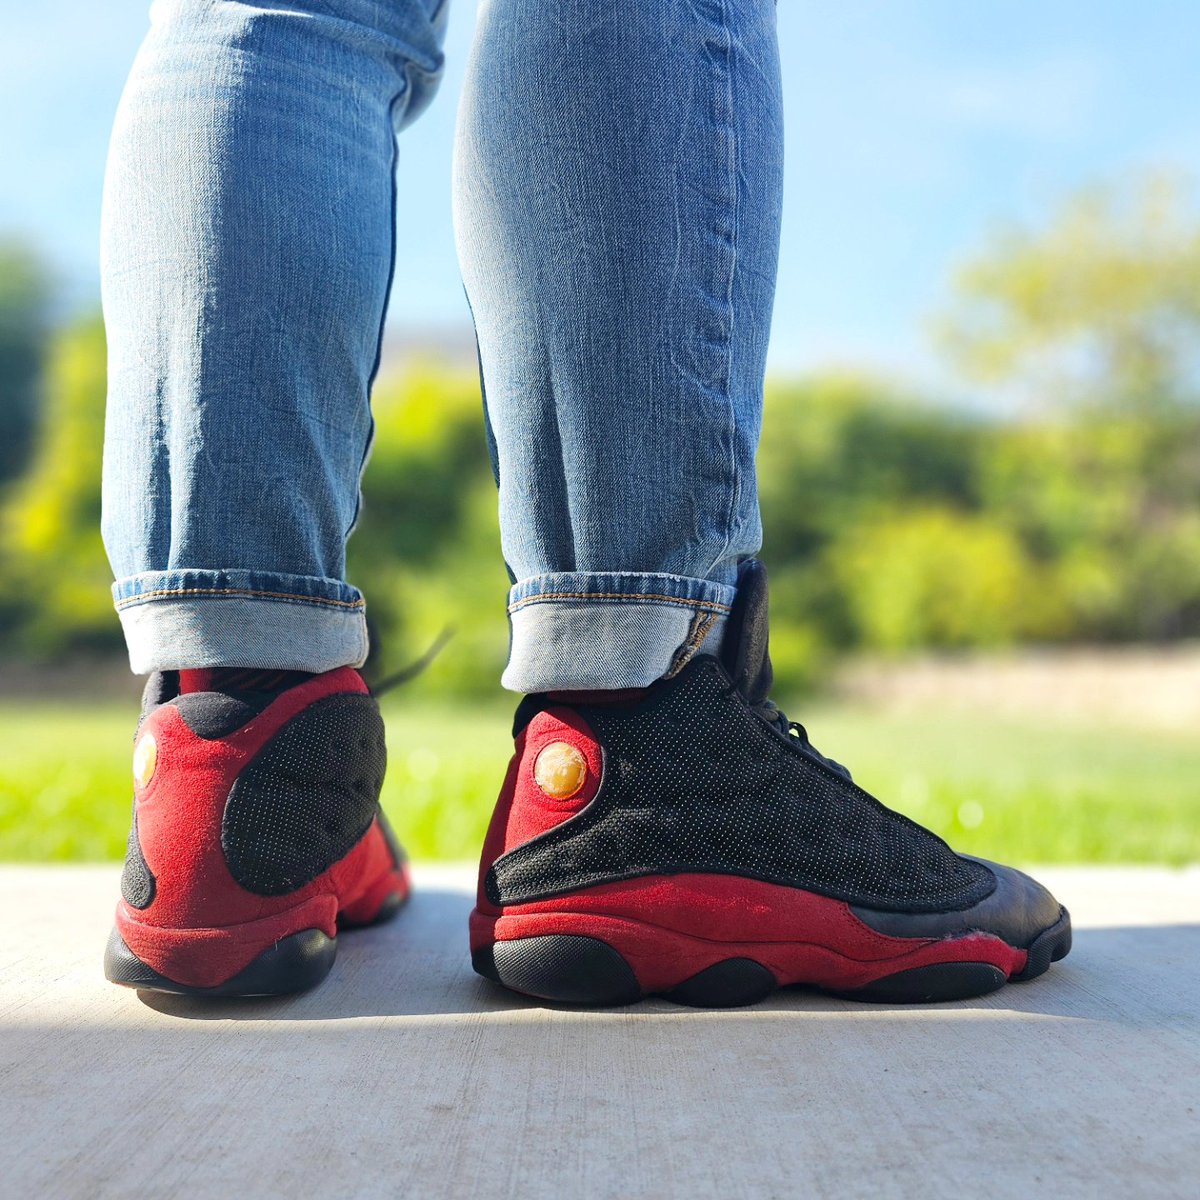 1998 OG Air Jordan 'Bred' 13s

What's the oldest pair in your collection?

#snkrskickcheck 
#snkrsliveheatingup #snkrs #nike  #sneakerheads #sneakers #yoursneakersaredope  #YouTube #jumpman23 #atmoscollectorsclub    #kotd #wdywt #inmyjs